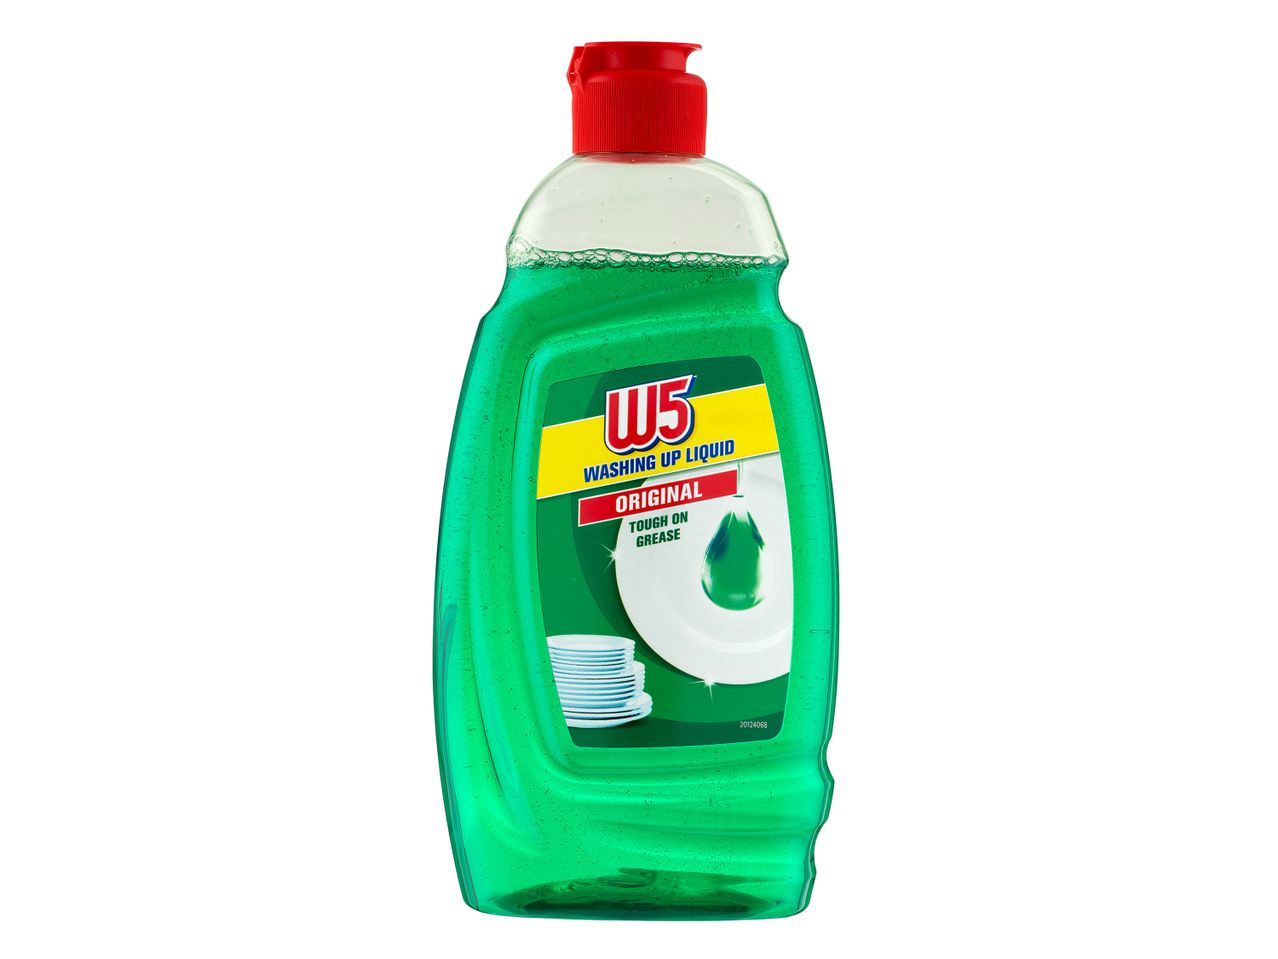 Go to full screen view: W5 Concentrated Washing Up Liquid - Image 1